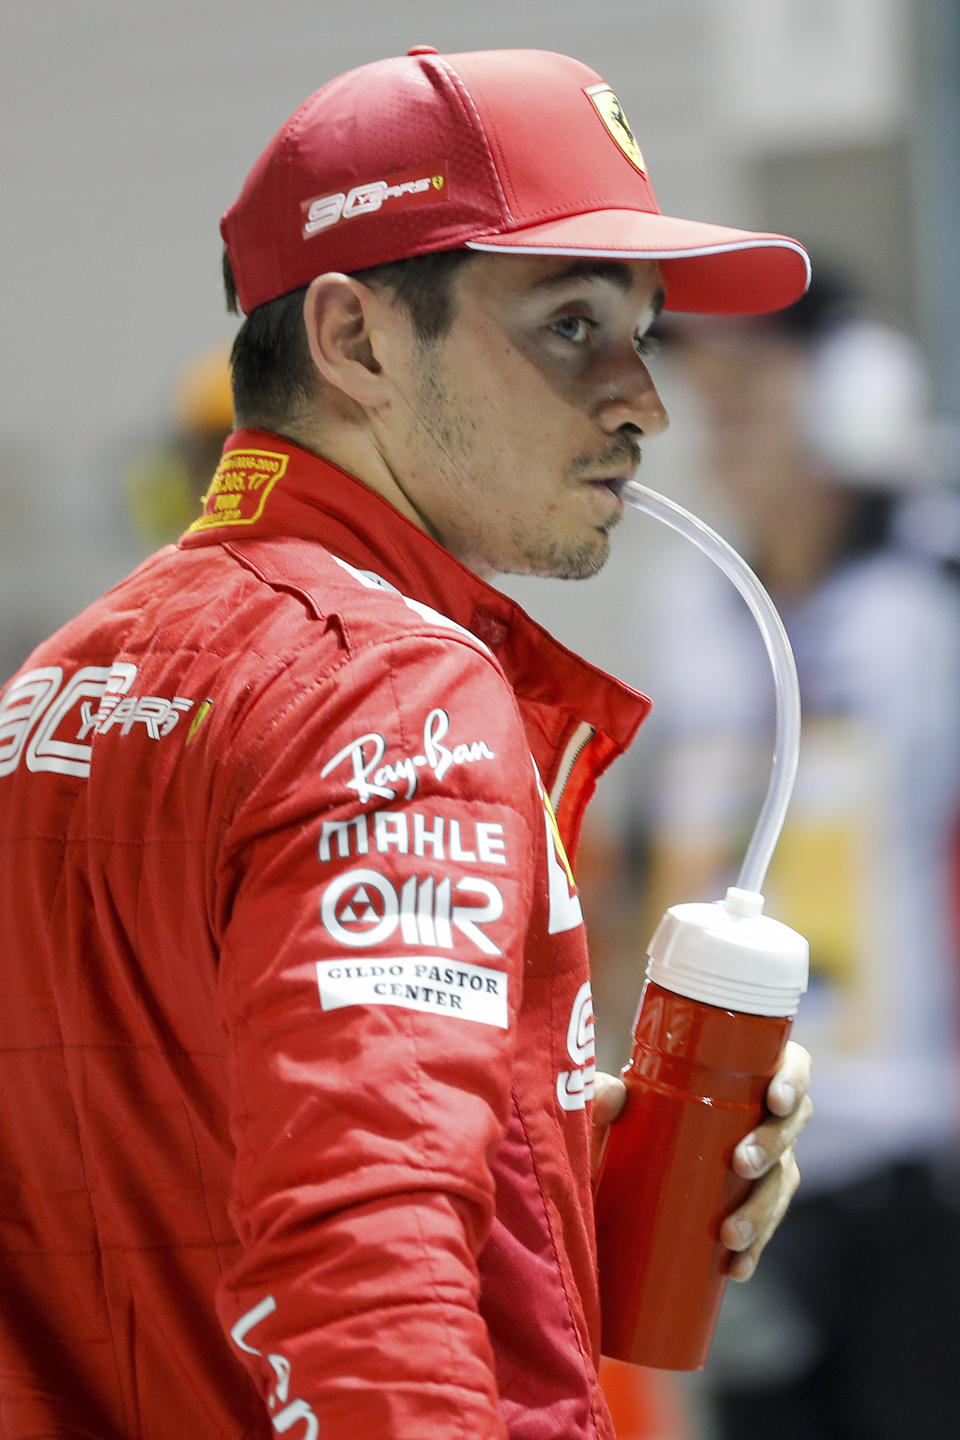 Ferrari driver Charles Leclerc of Monaco takes a drink after taking pole position in the qualifying session for the Singapore Formula One Grand Prix at the Marina Bay City Circuit in Singapore, Saturday, Sept. 21, 2019. (AP Photo/Vincent Thian)